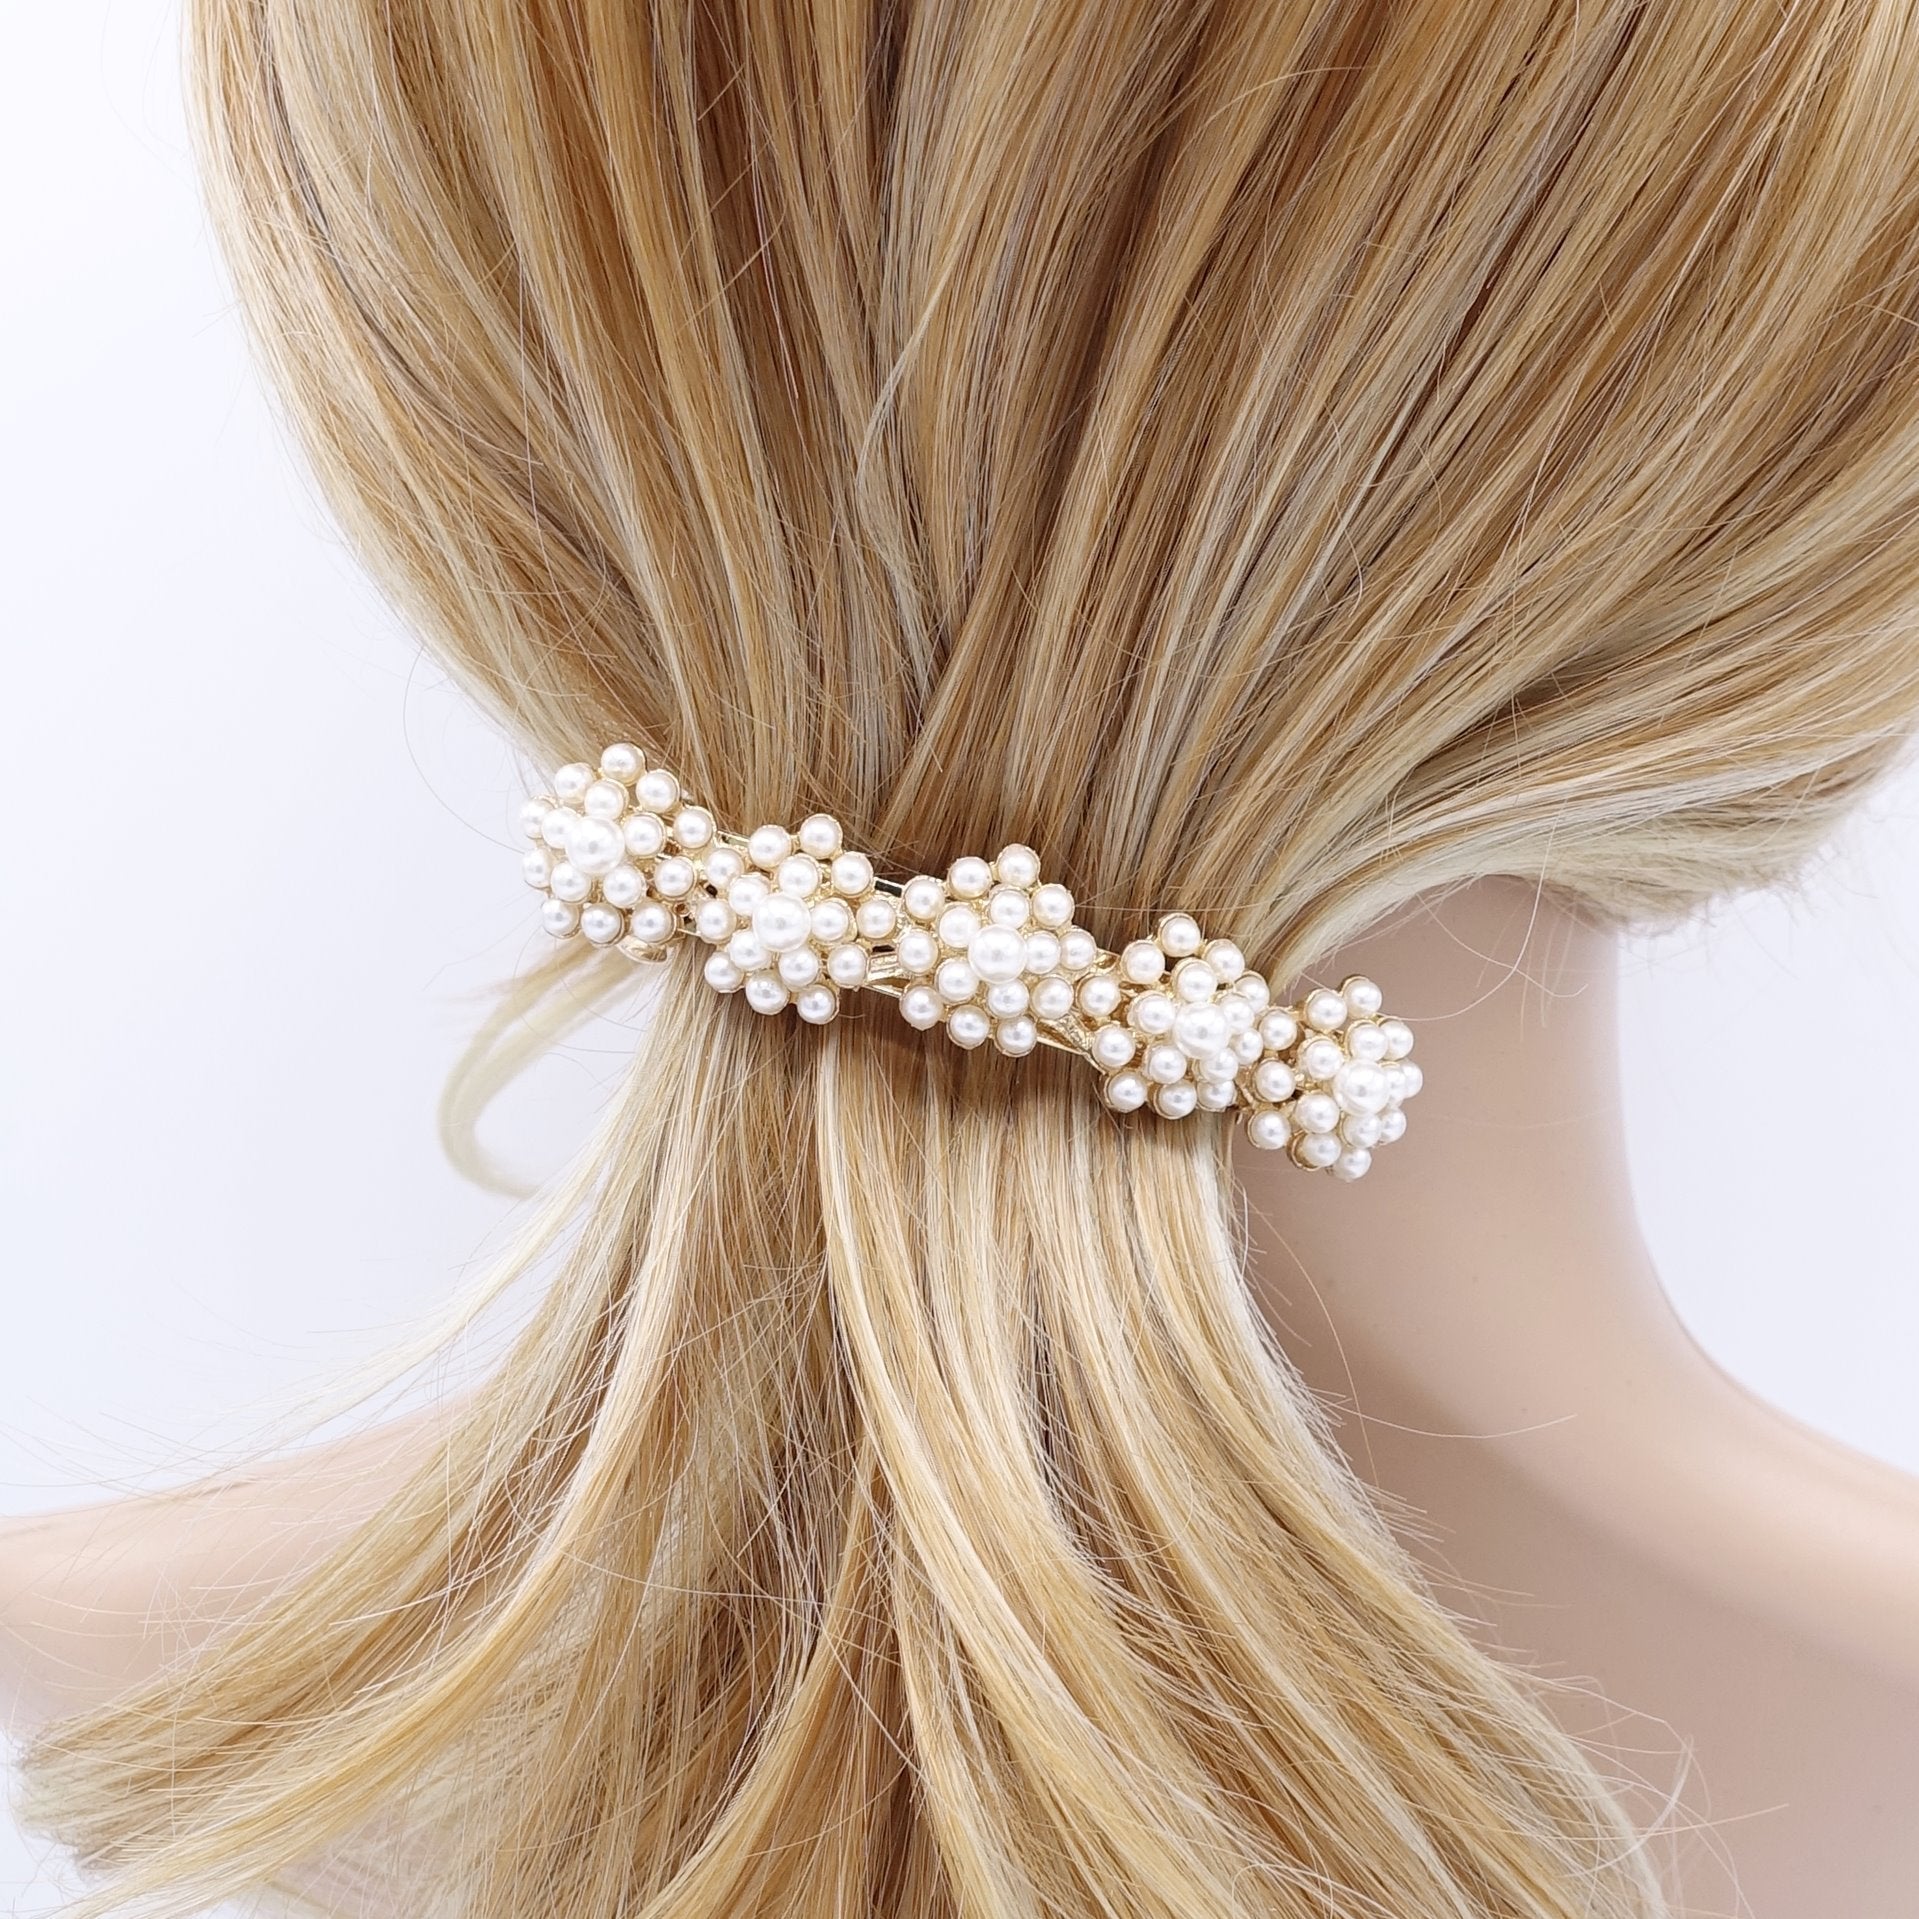 VeryShine claw/banana/barrette Pearl only tiny pearl ball flower french hair barrette women hair accessory